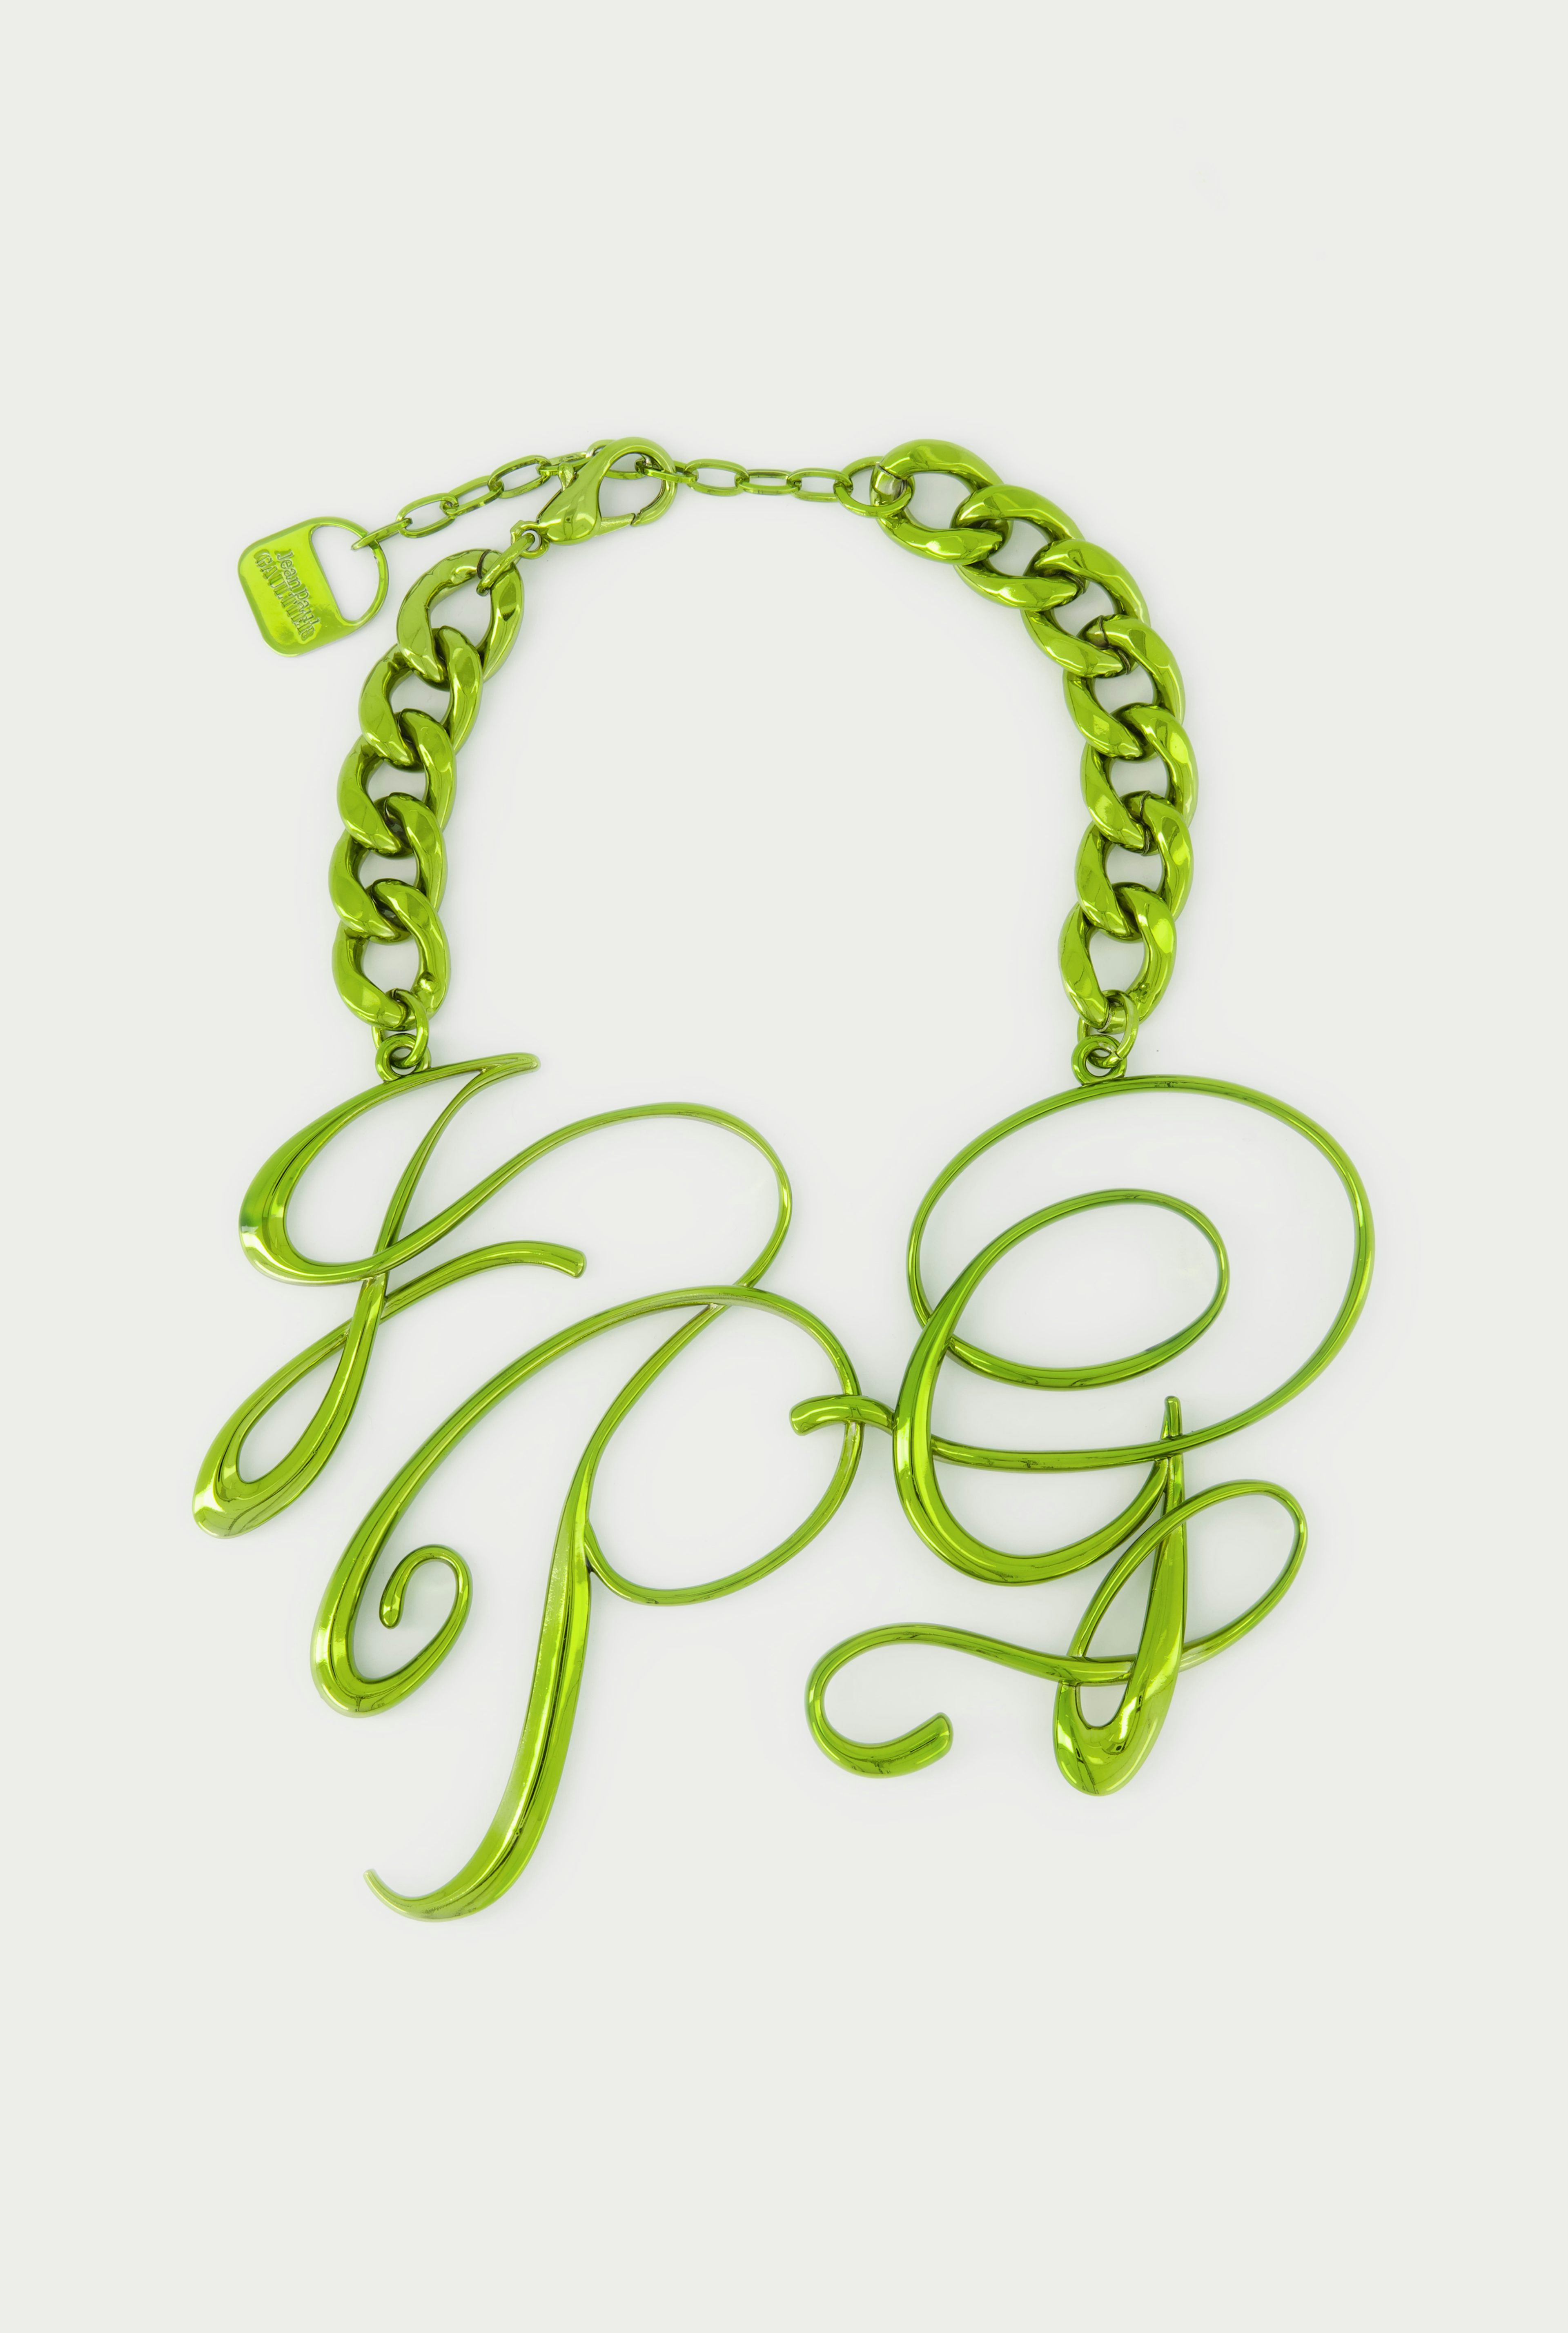 The JPG Calligraphy Necklace